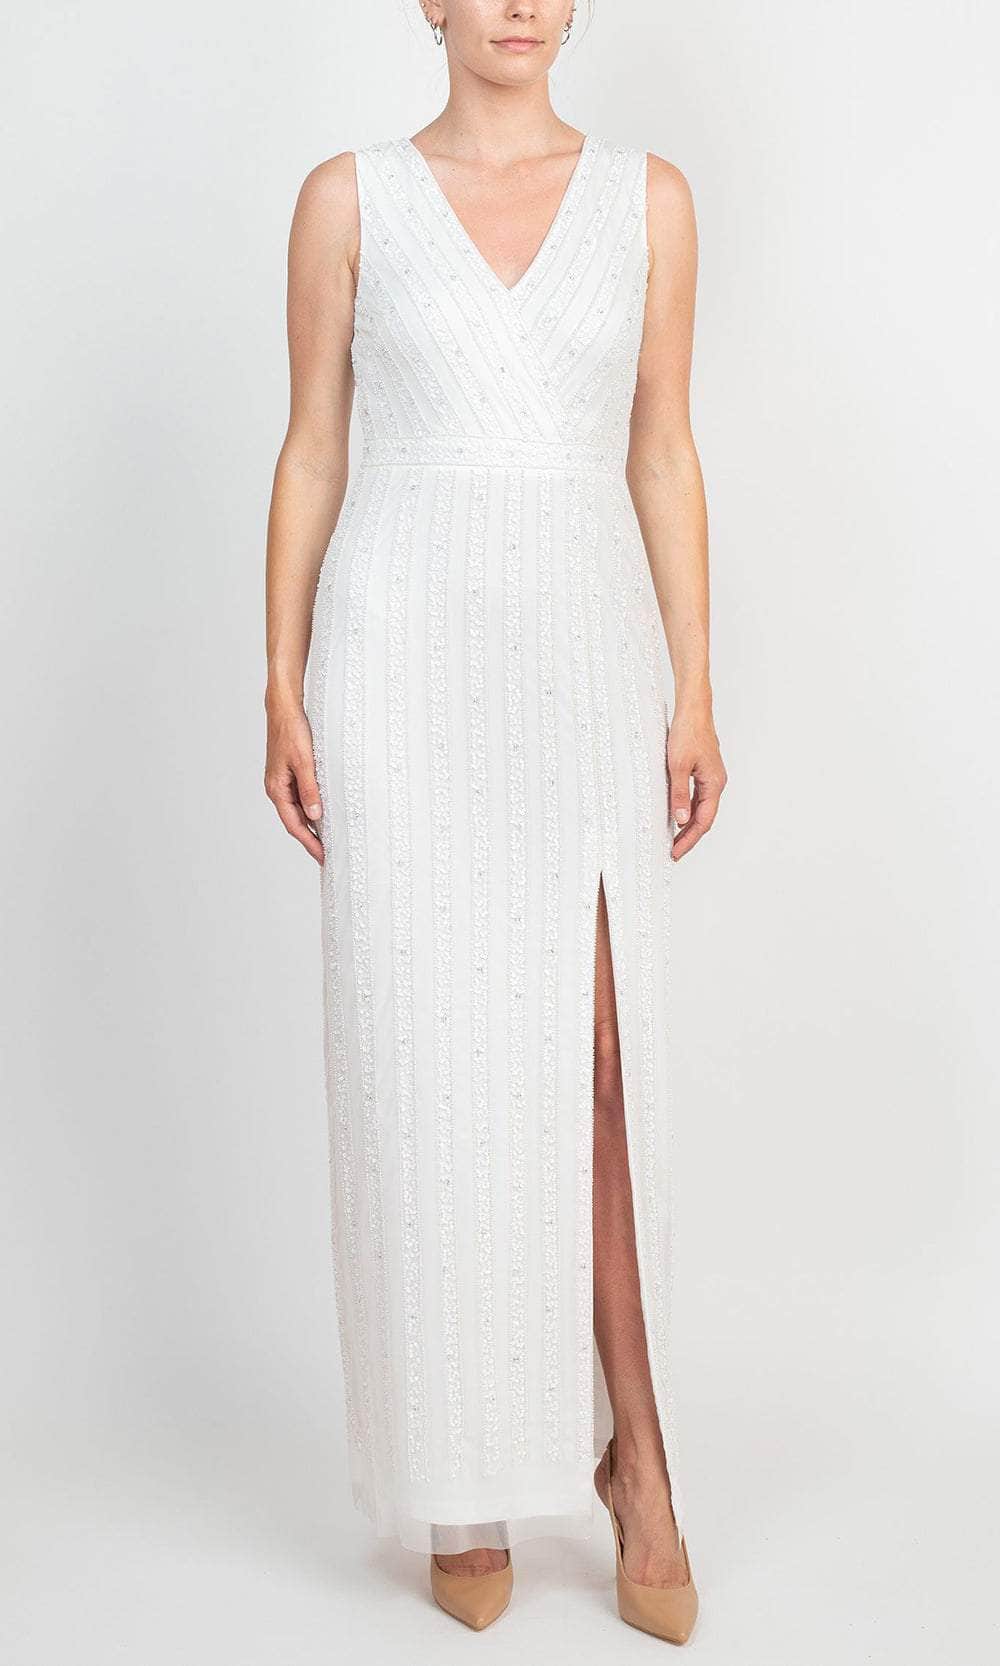 Image of Adrianna Papell AP1E208752 - Beaded Sheath Evening Dress with Slit